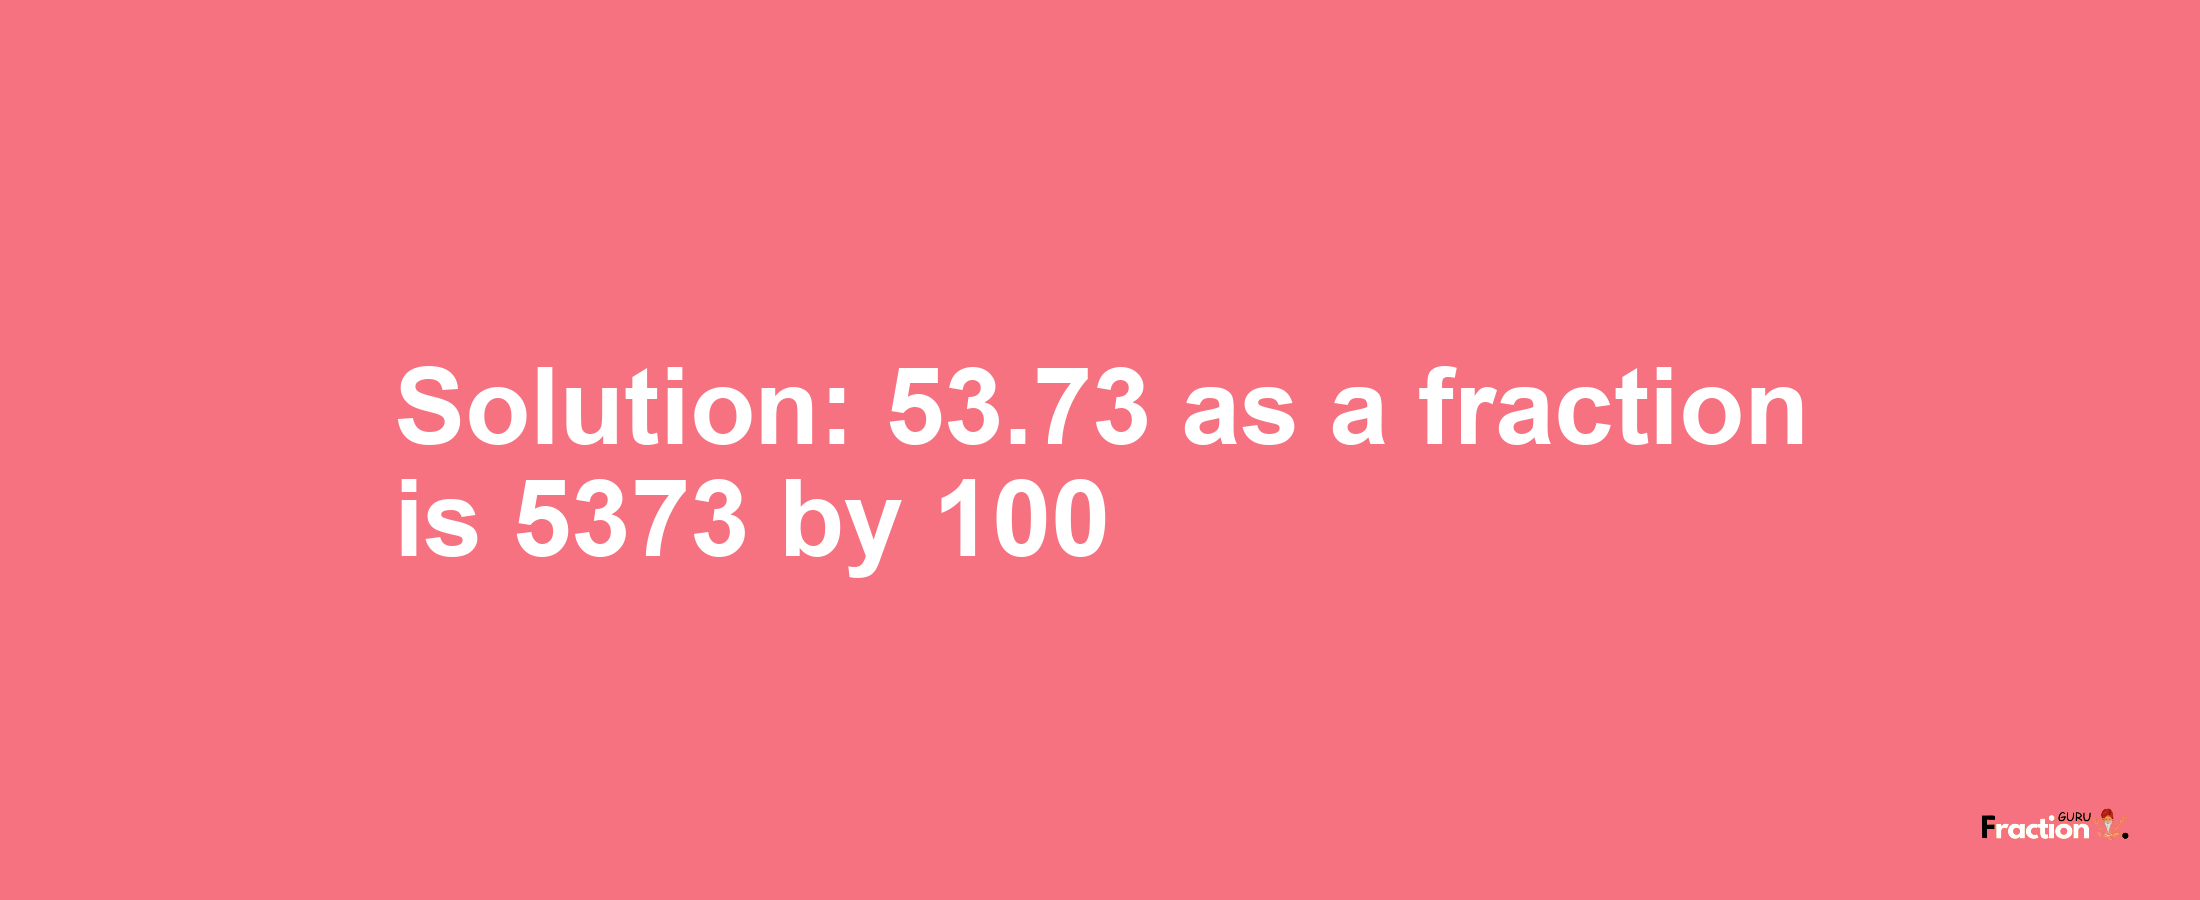 Solution:53.73 as a fraction is 5373/100